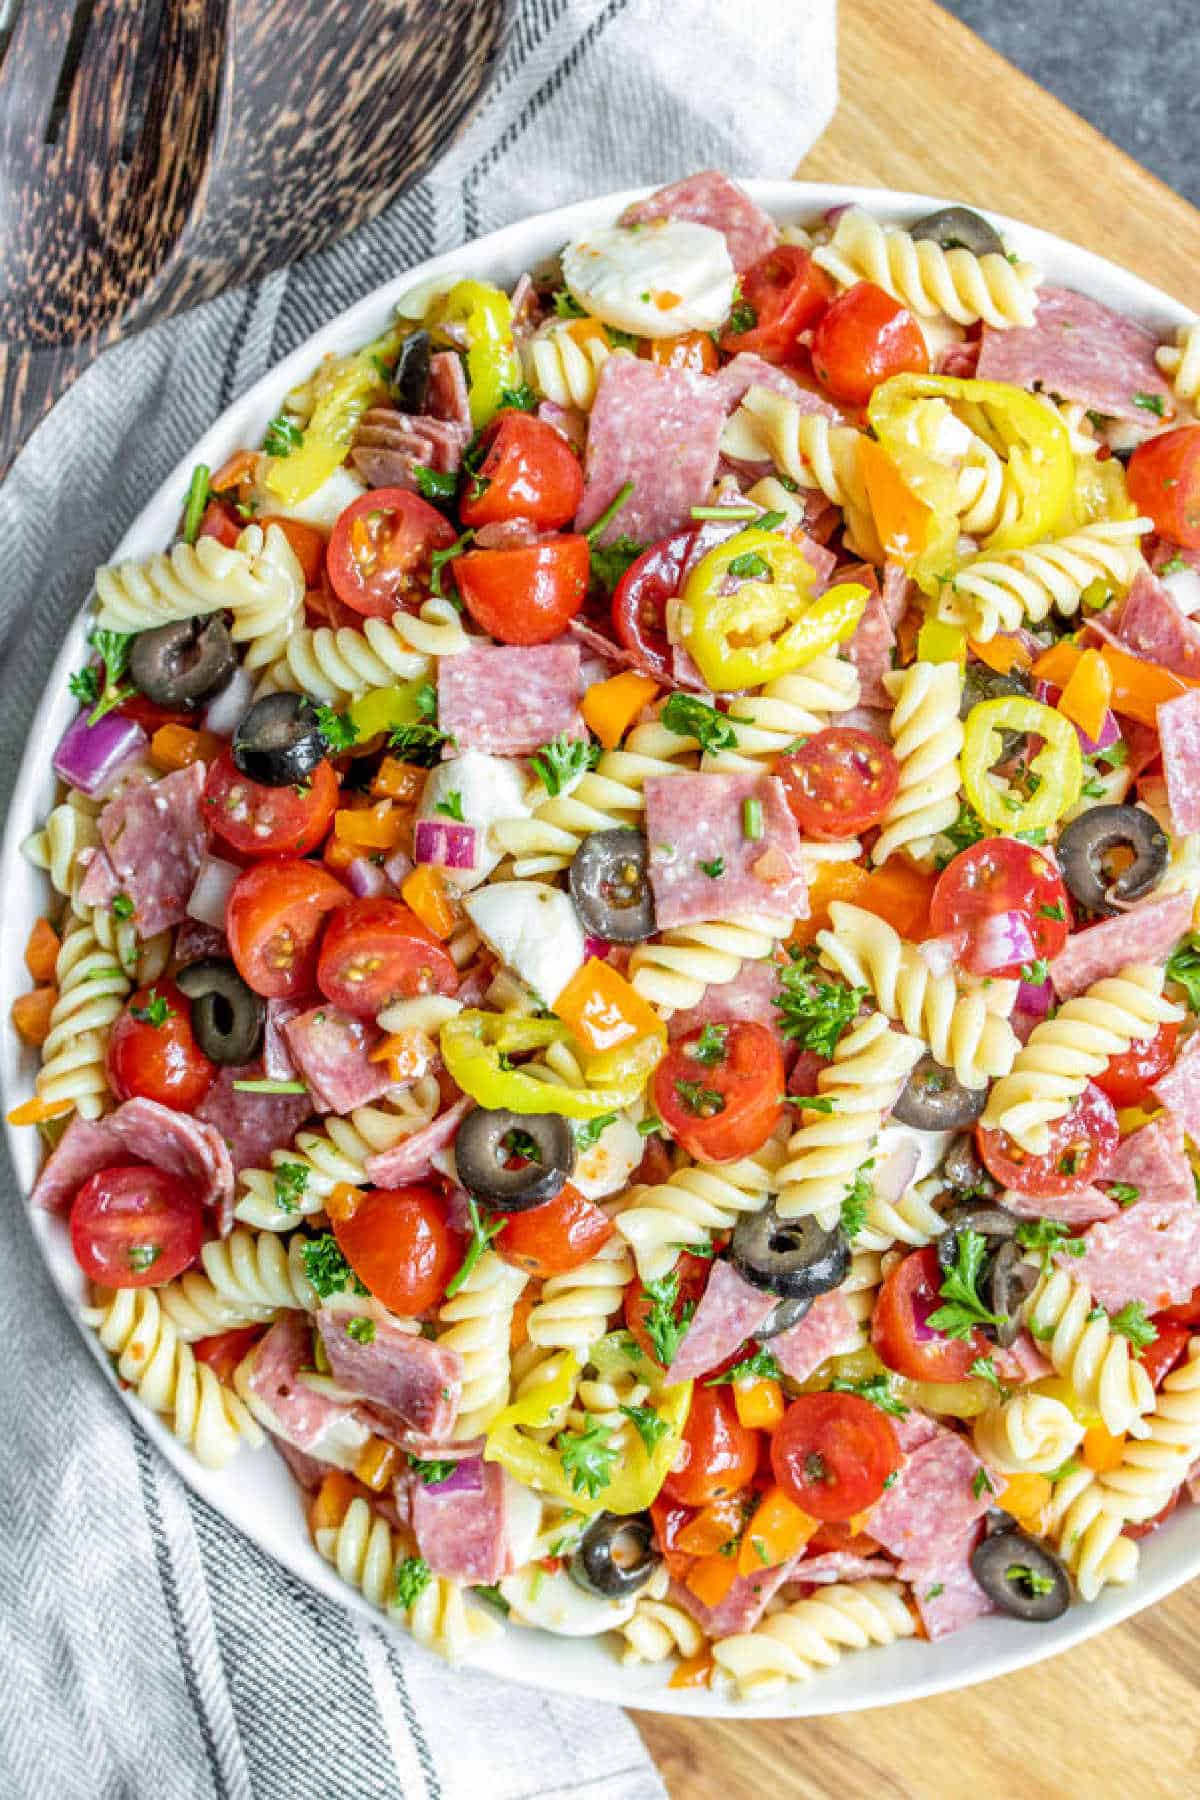 Italian Pasta Salad in a bowl with wooden spoon and linen cloth